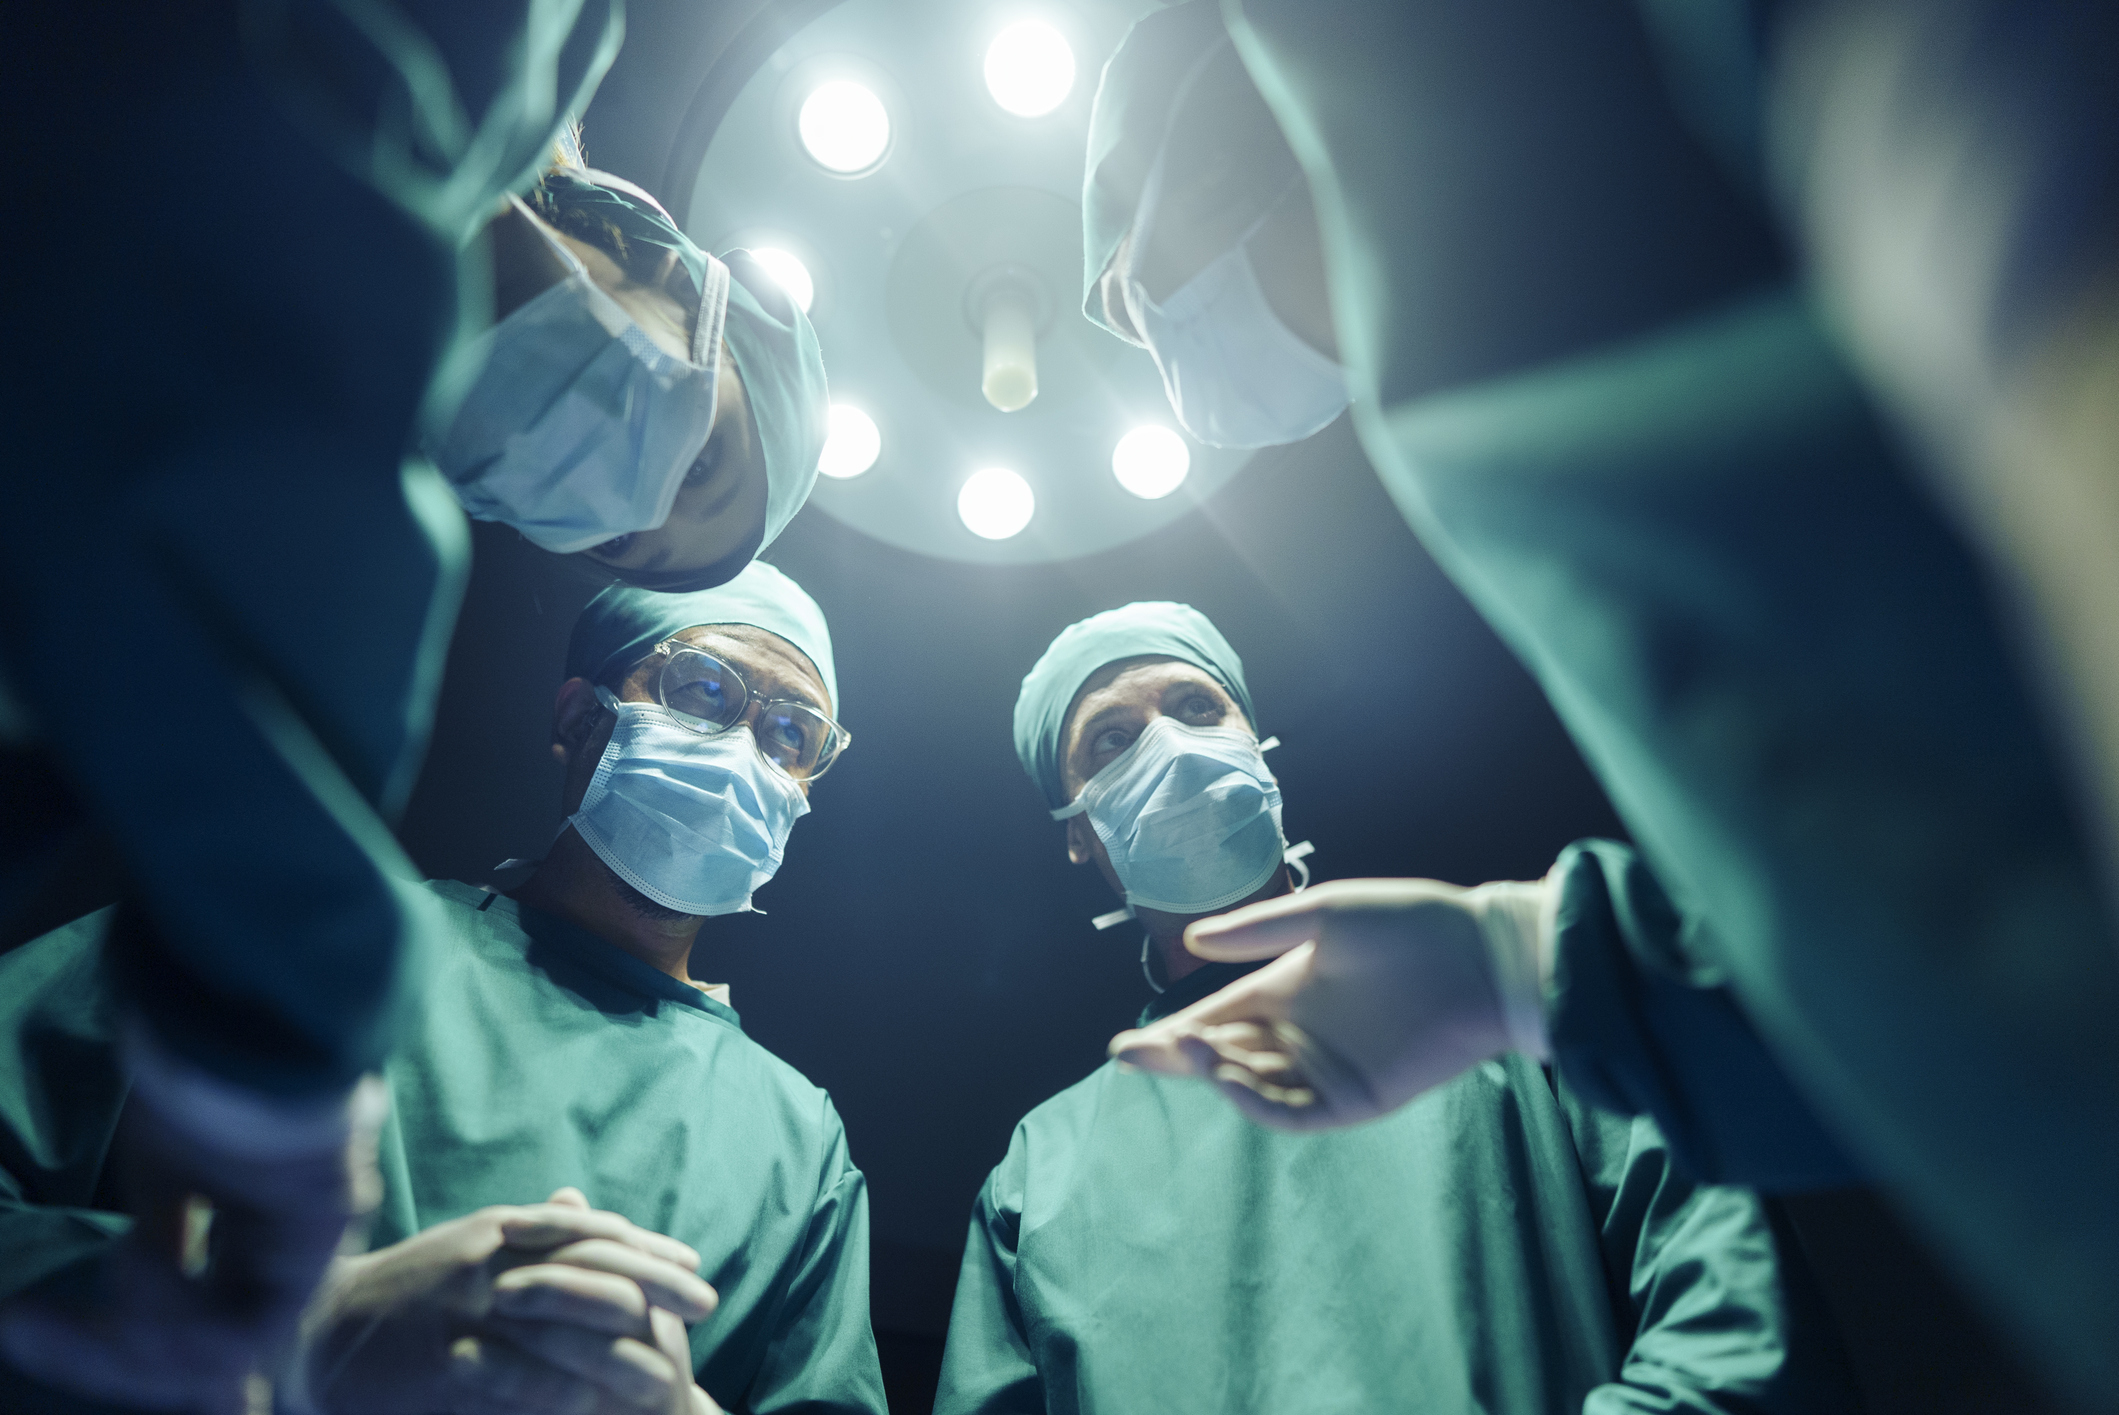 Surgeons in a hospital room under bright lights